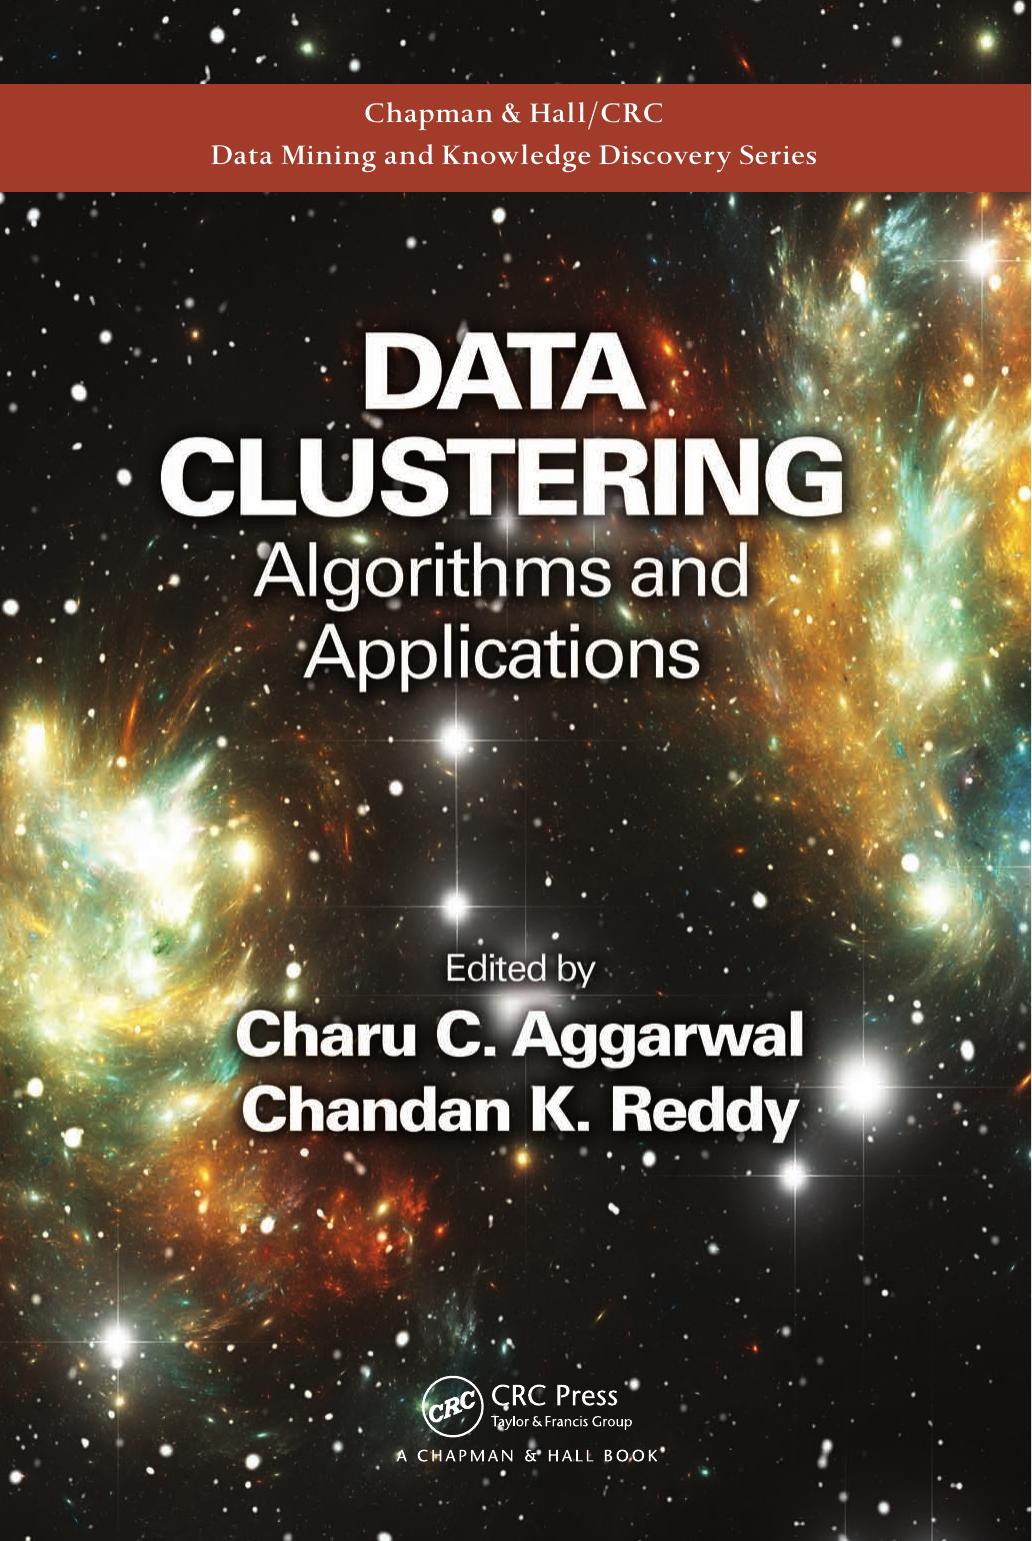 Data Clustering: Algorithms and Applications